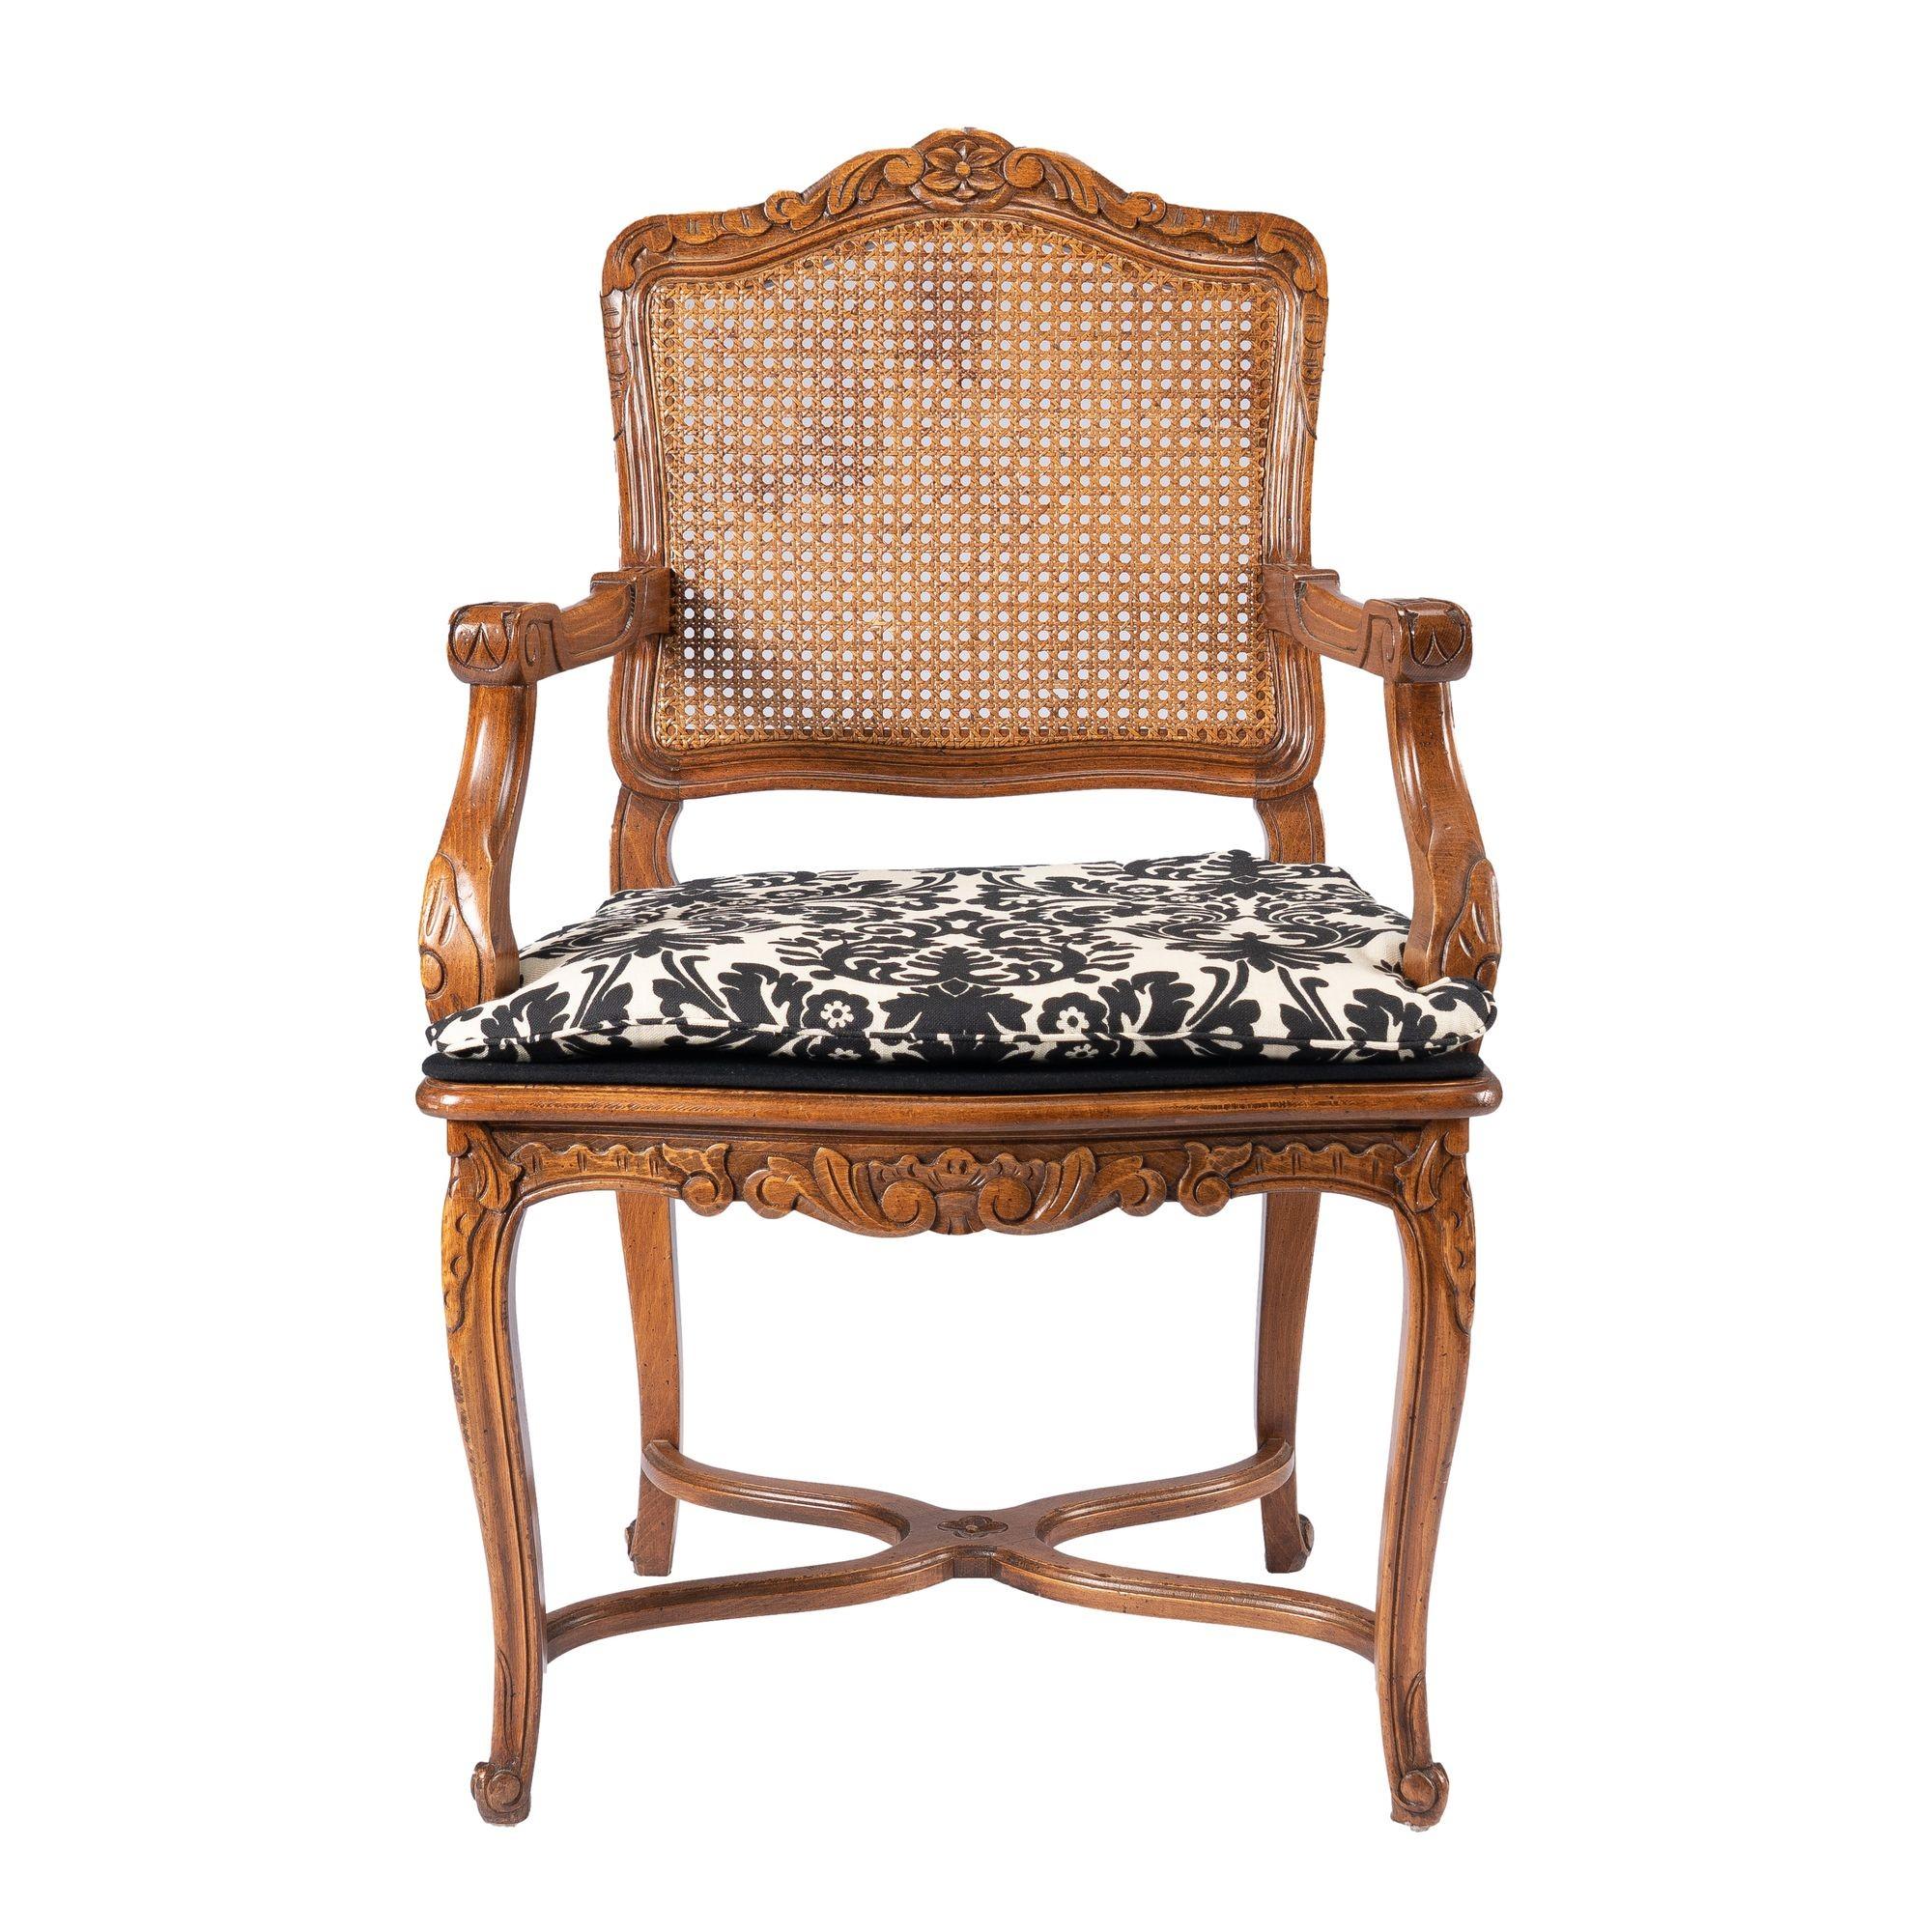 Academic Revival, Louis XVI style fauteuil with a caned seat & back panel, fitted with an upholstered seat cushion and upholstered seat platform.
France, early 20th century.

Dimensions: 24” W x 18-3/4” D x 38” H
27” (arm height)
20” (seat